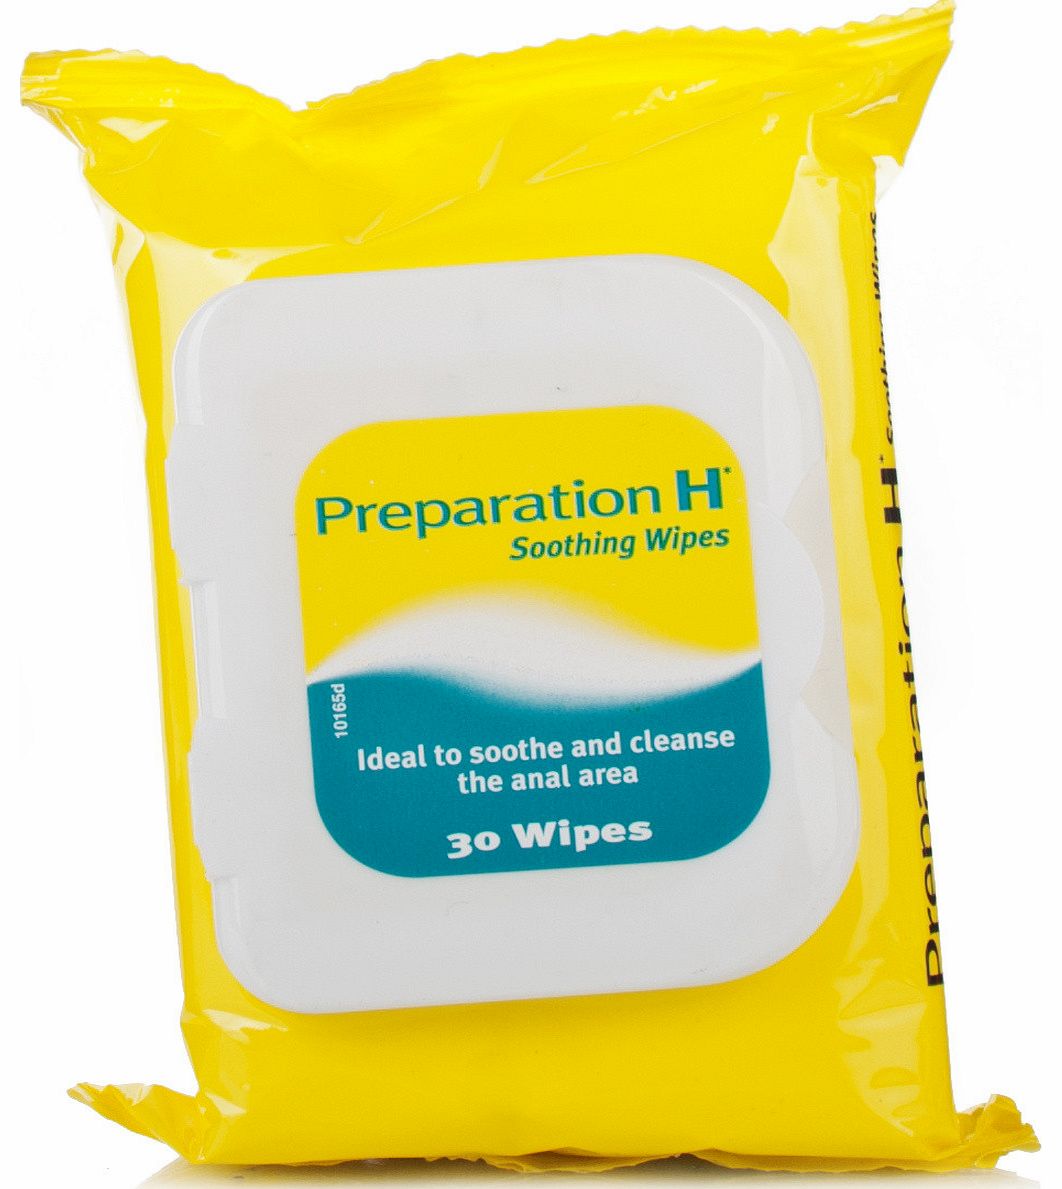 Preparation H Soothing Wipes